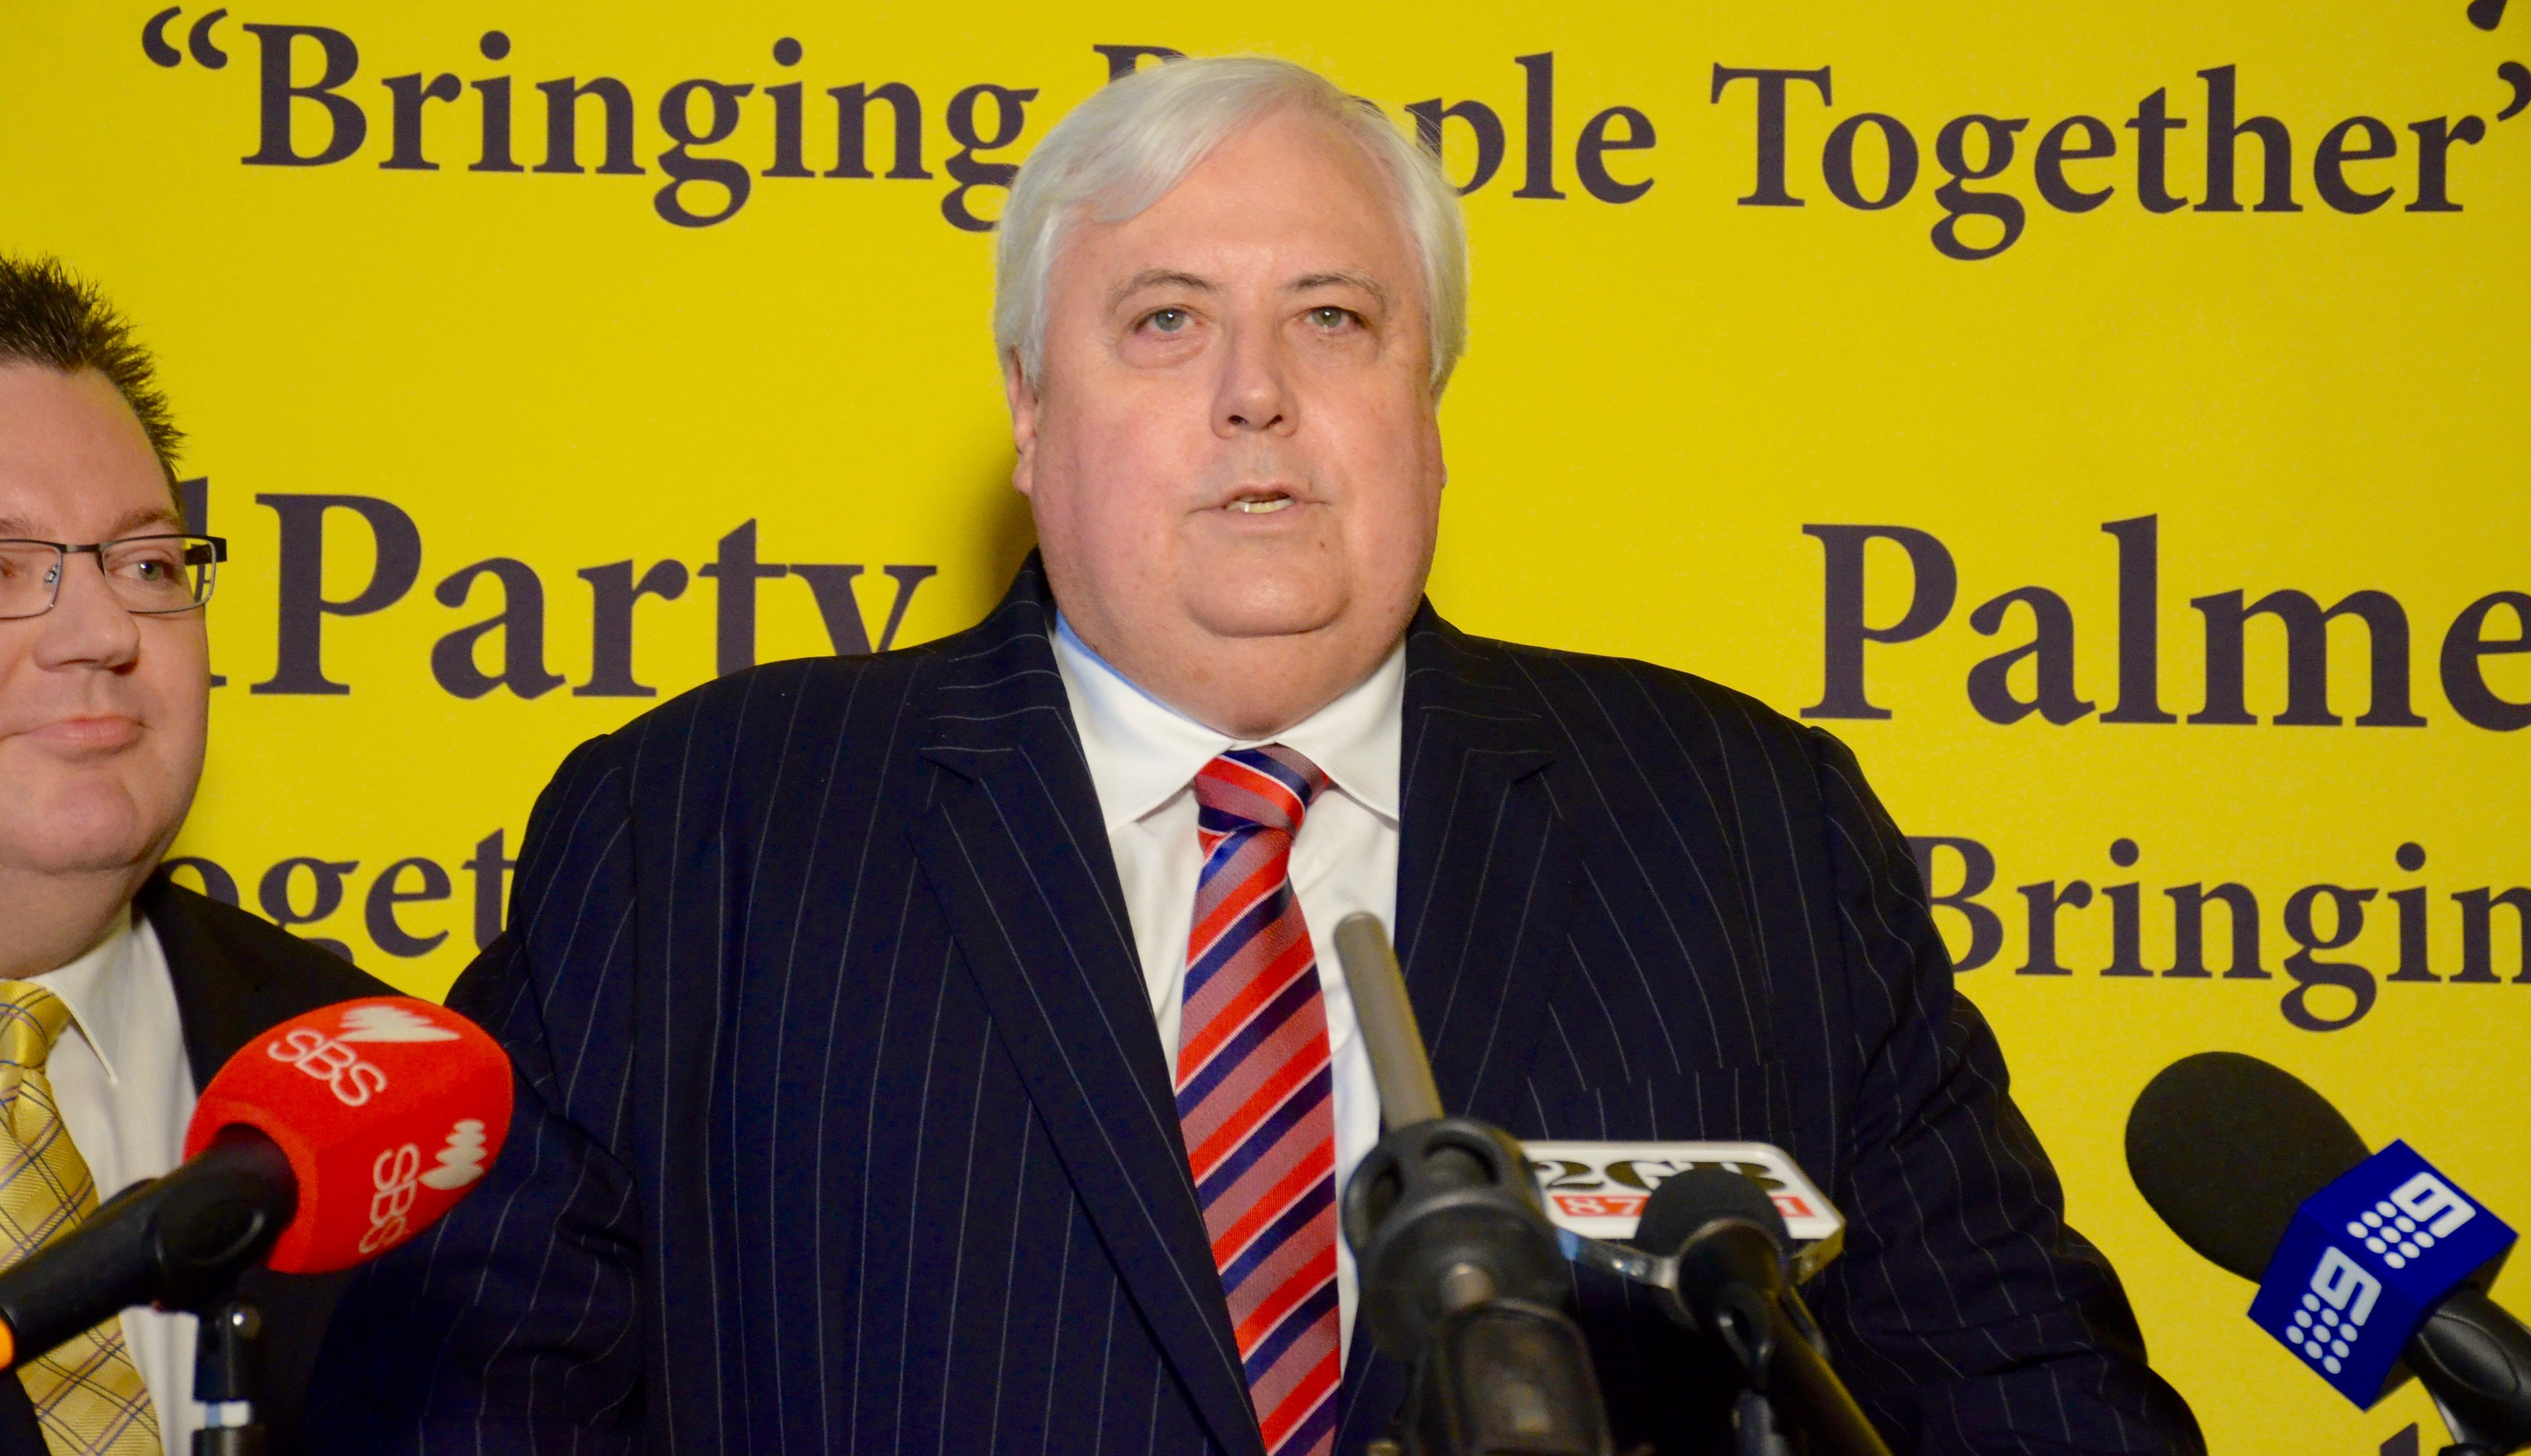 Only churches should control marriage: Clive Palmer